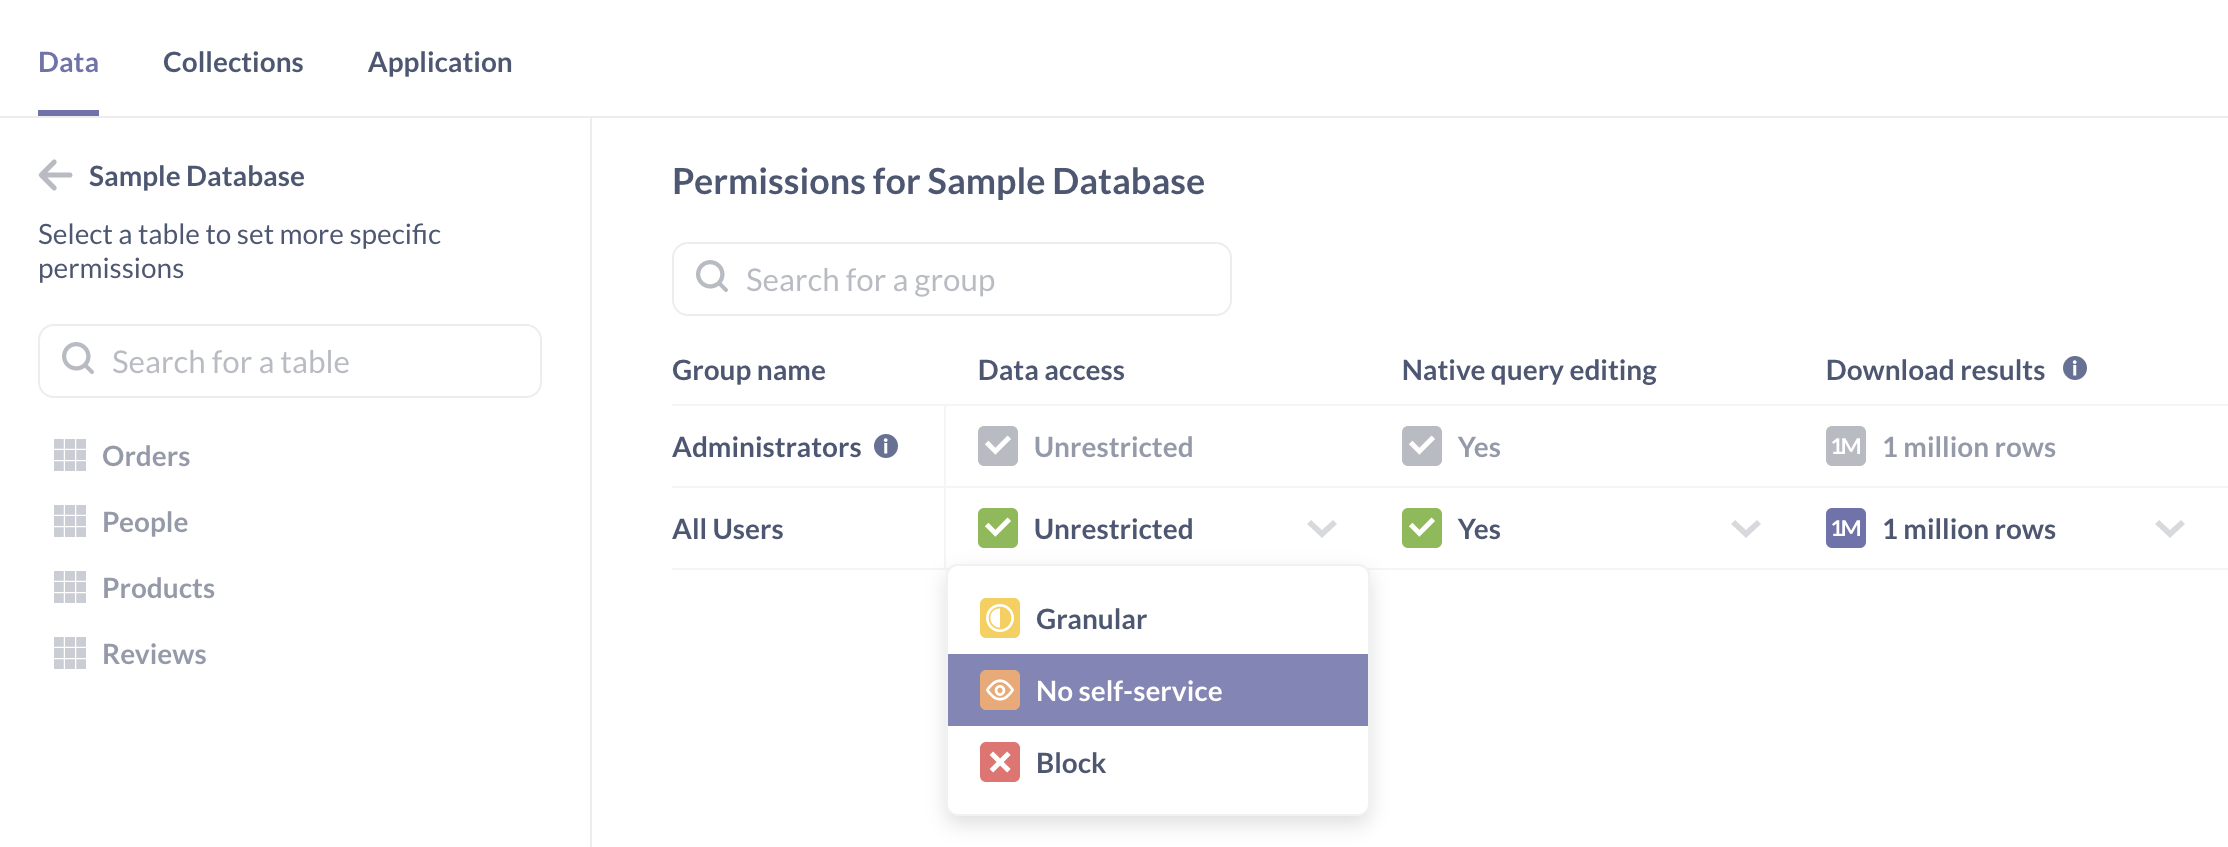 Selecting the No self-service permission for the All Users group to the Sample Database.